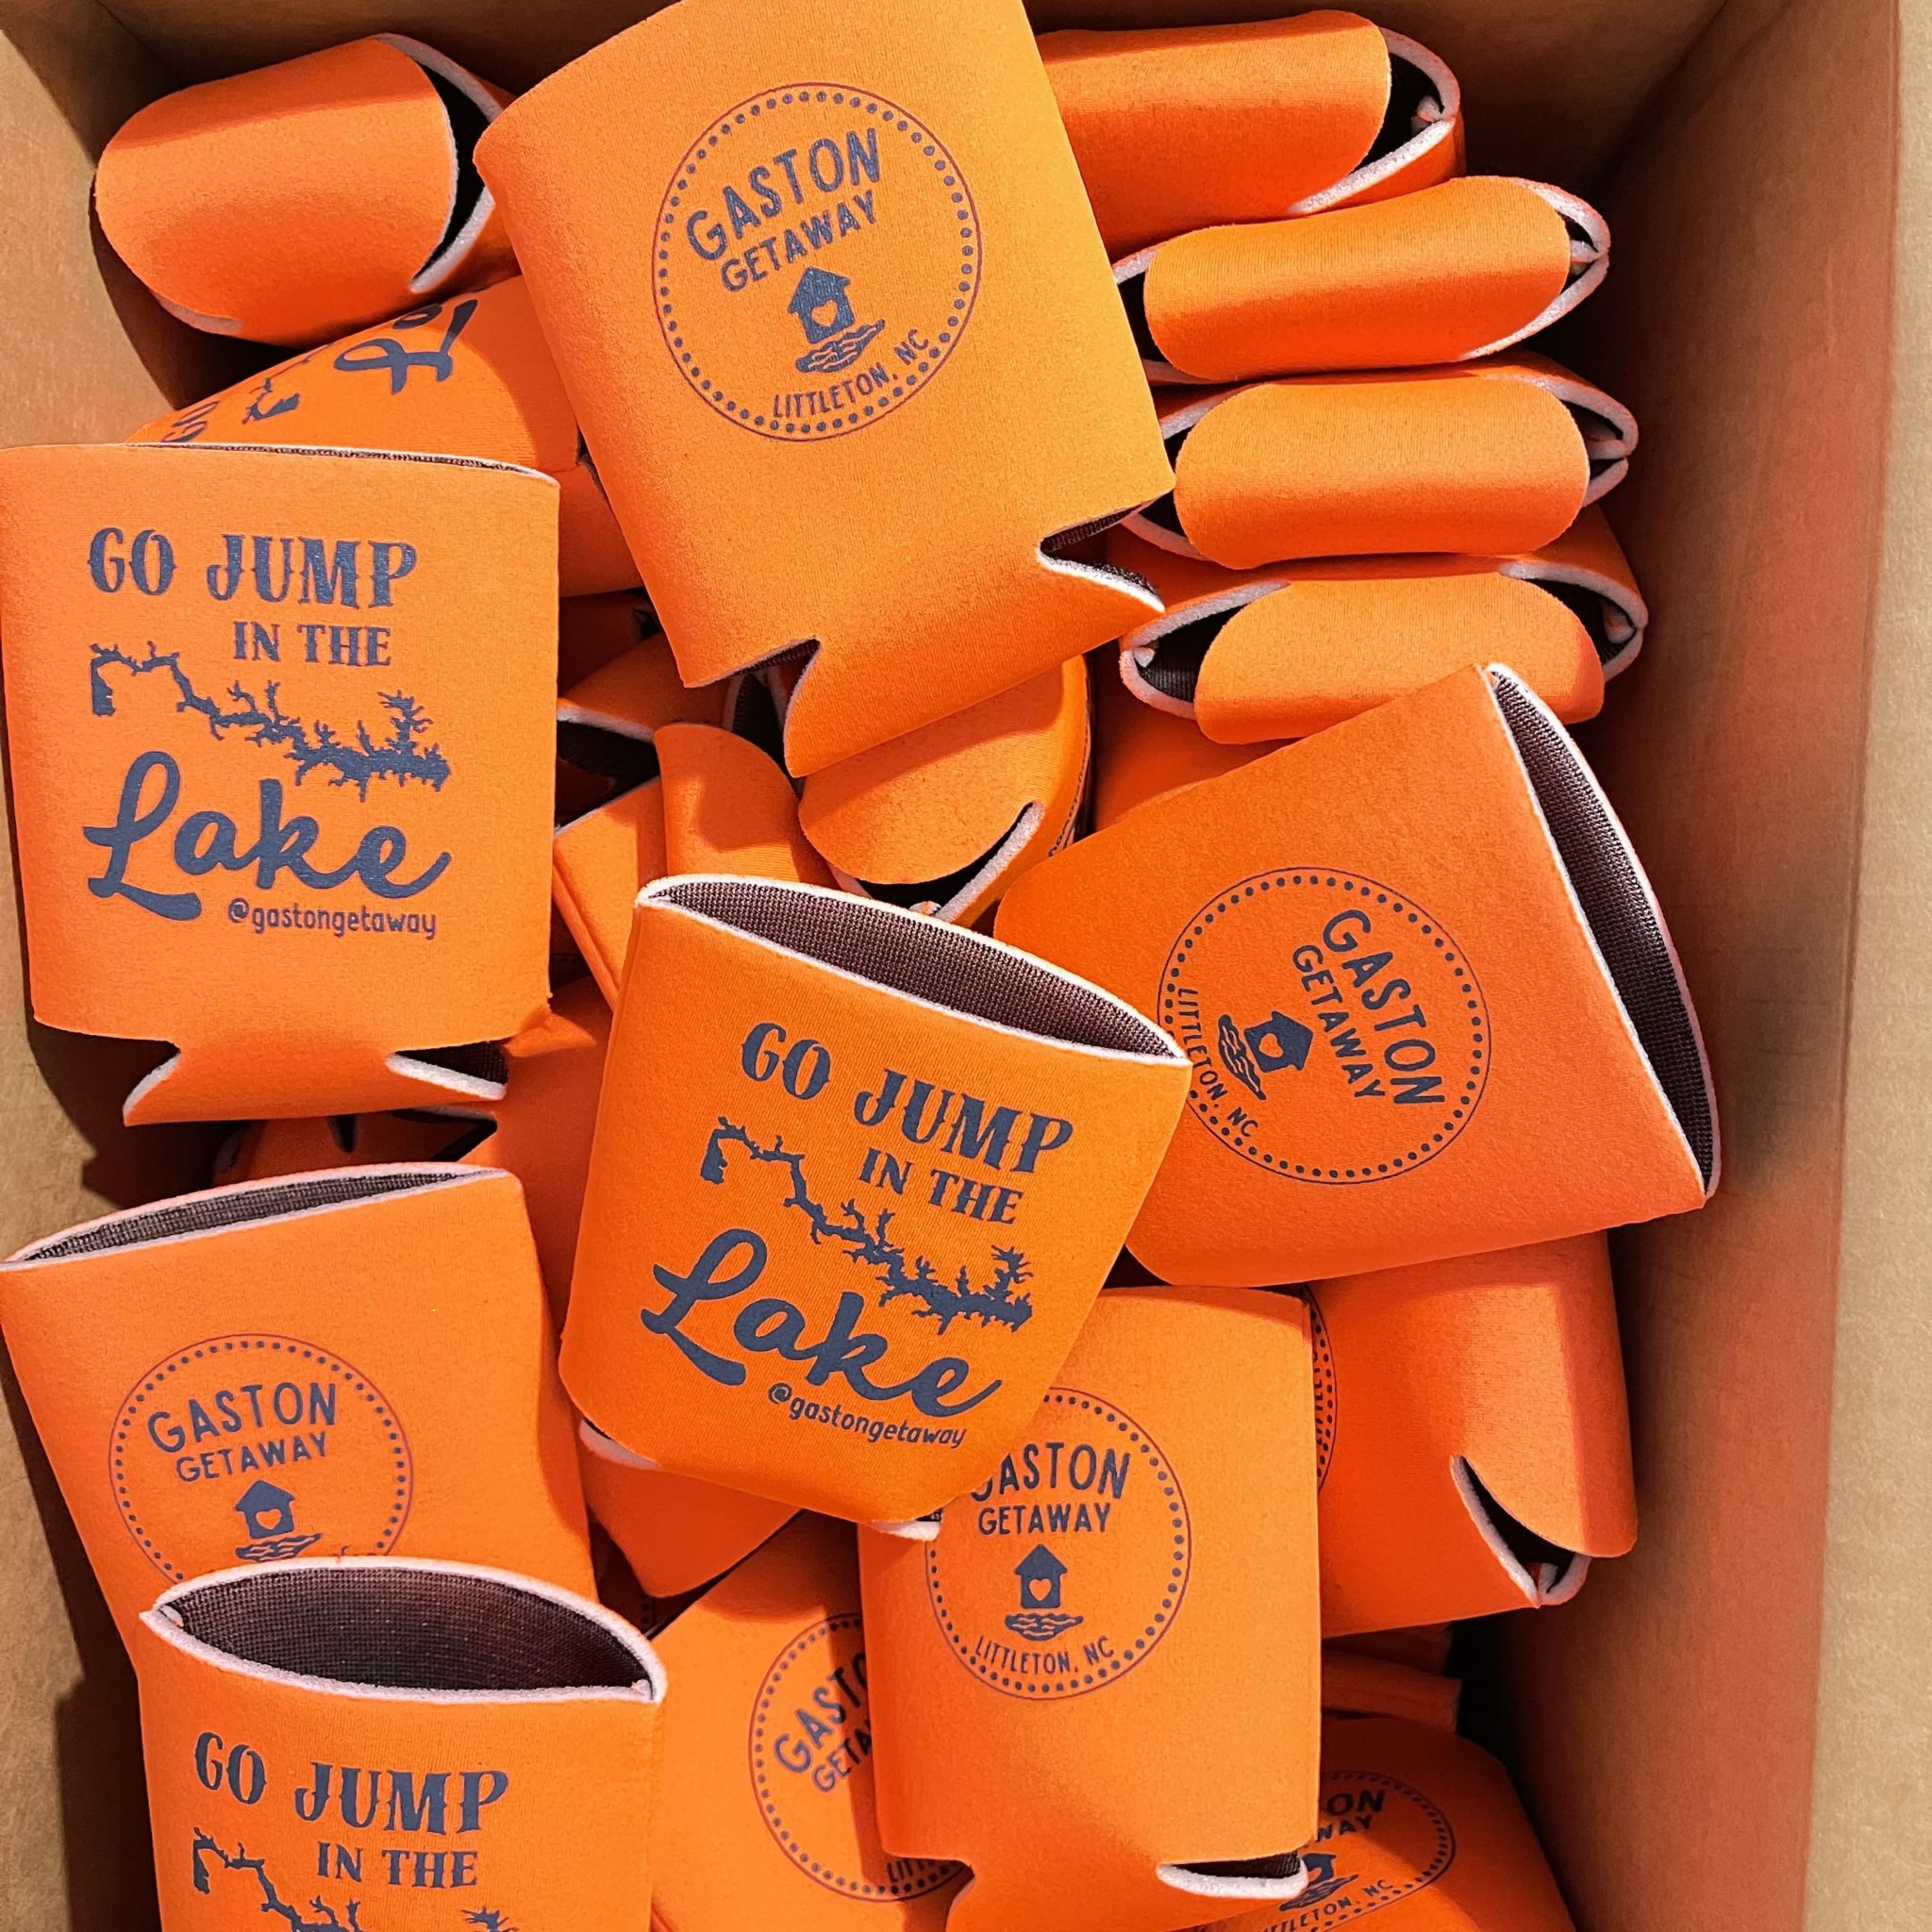 a box full of custom can coolers that say "go jump in the lake" and "gaston getaway"